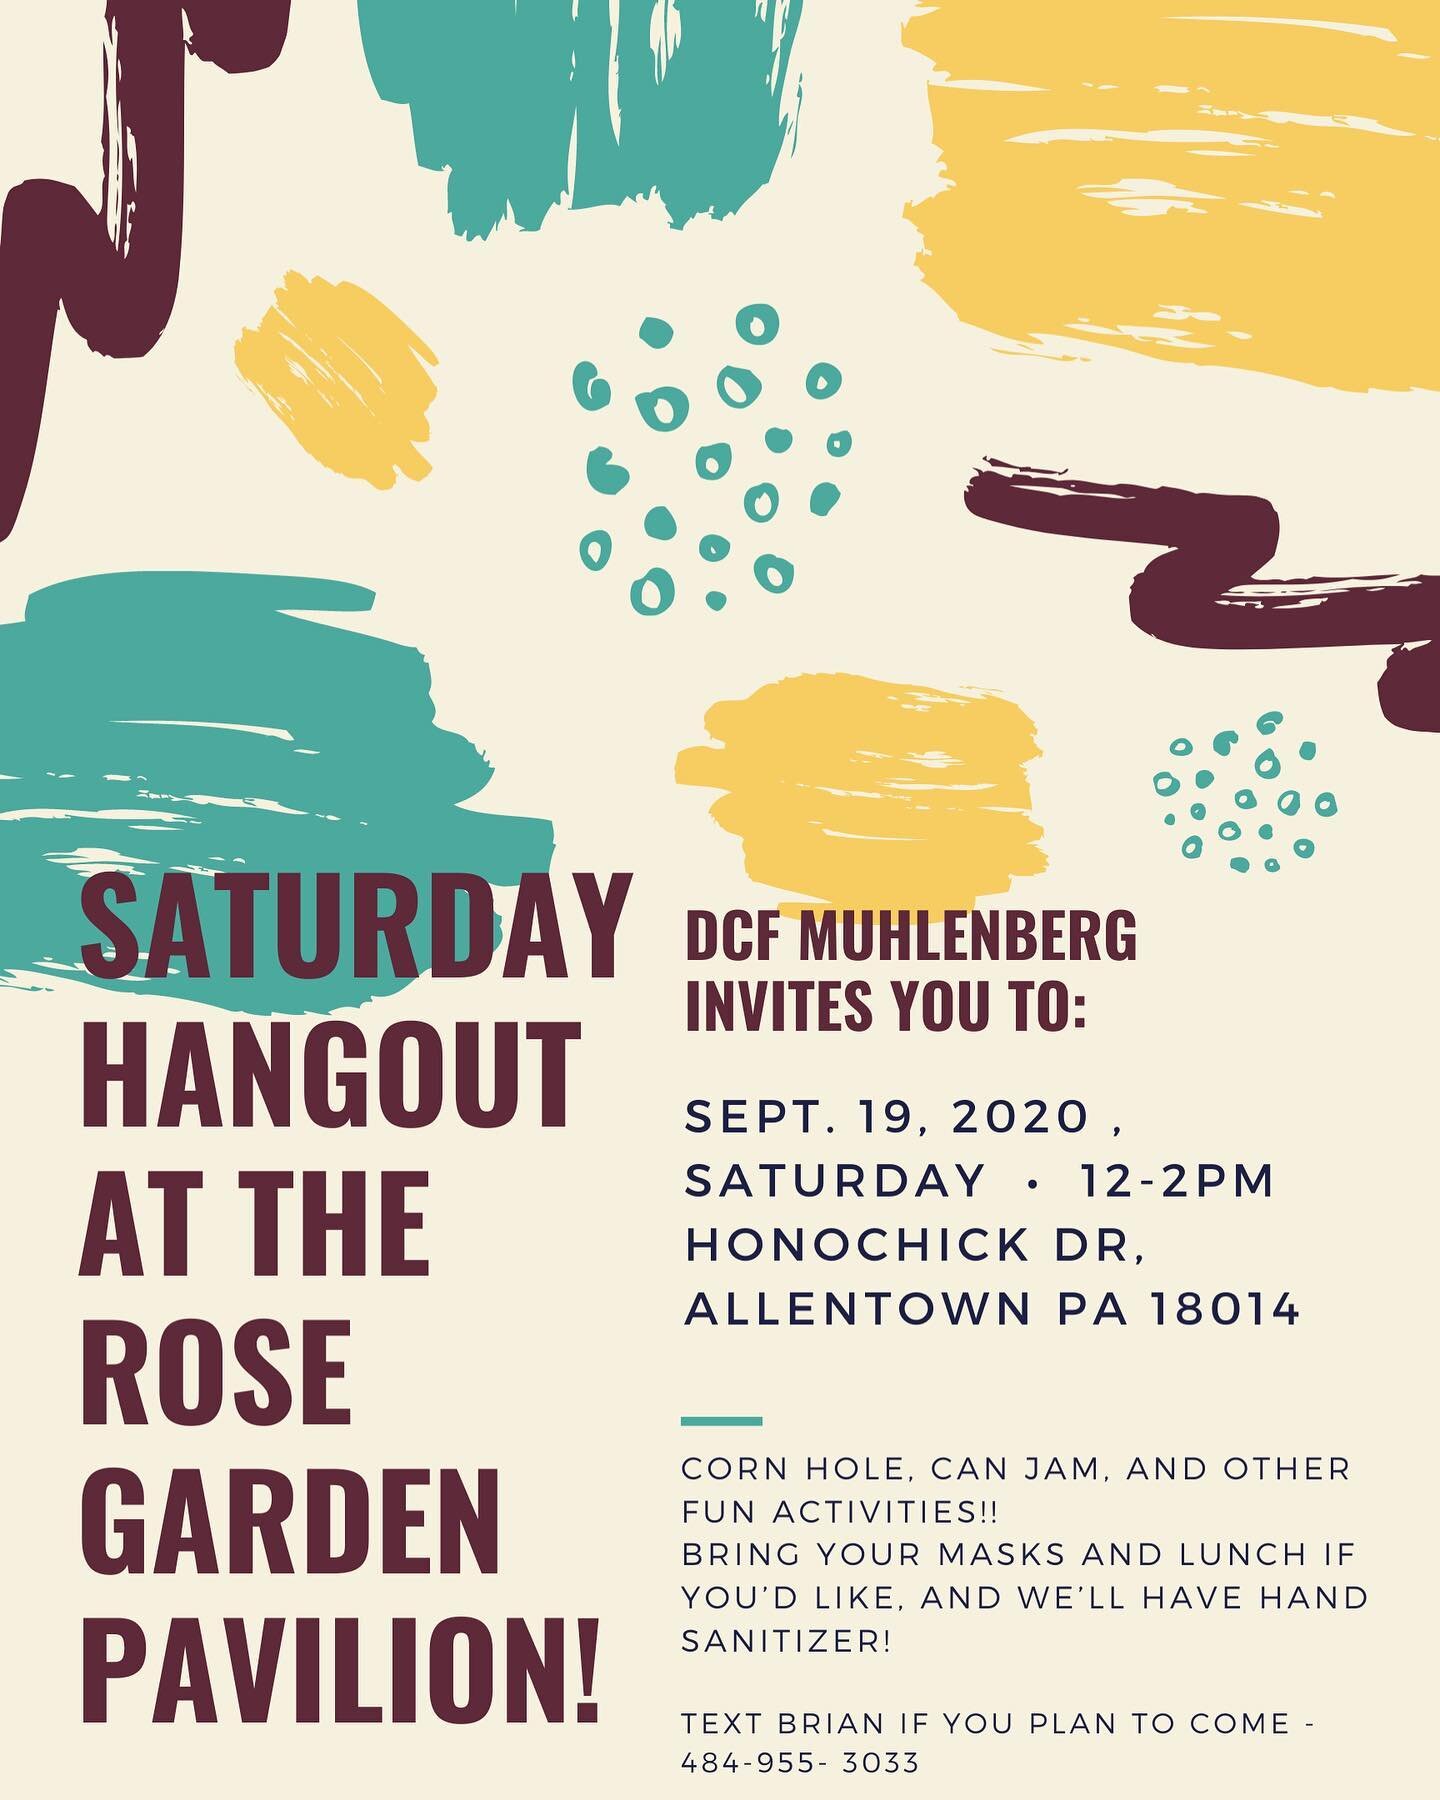 Looking for something to do this Saturday?  Come hang out right down the street from campus and take advantage of what will feel like a beautiful fall day!  Just DM us if you plan to come so we can abide by the college&rsquo;s policy for off-campus g